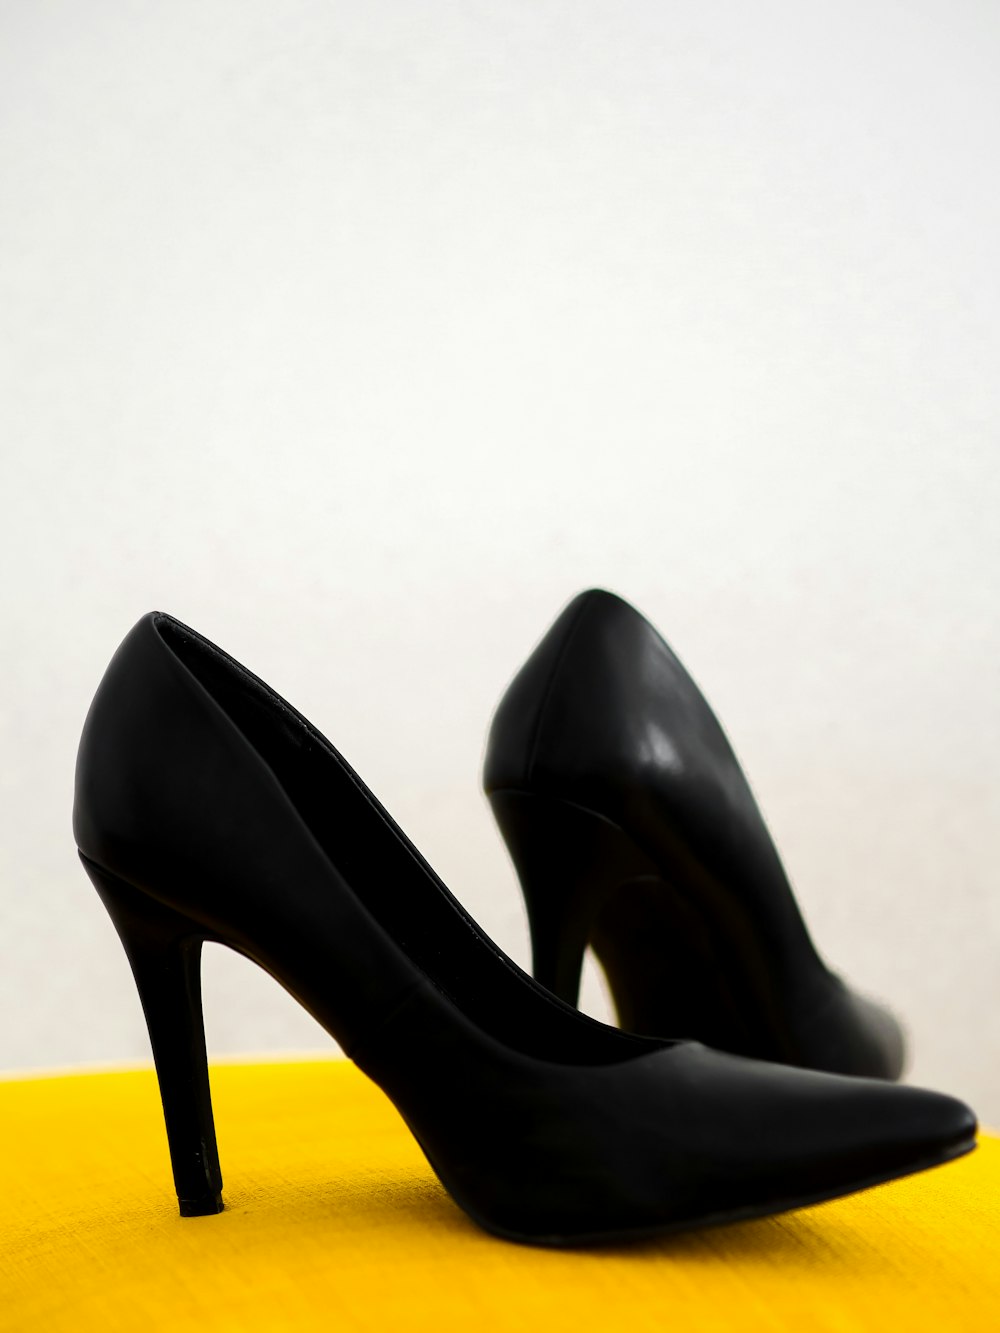 black leather heeled shoes on yellow chair